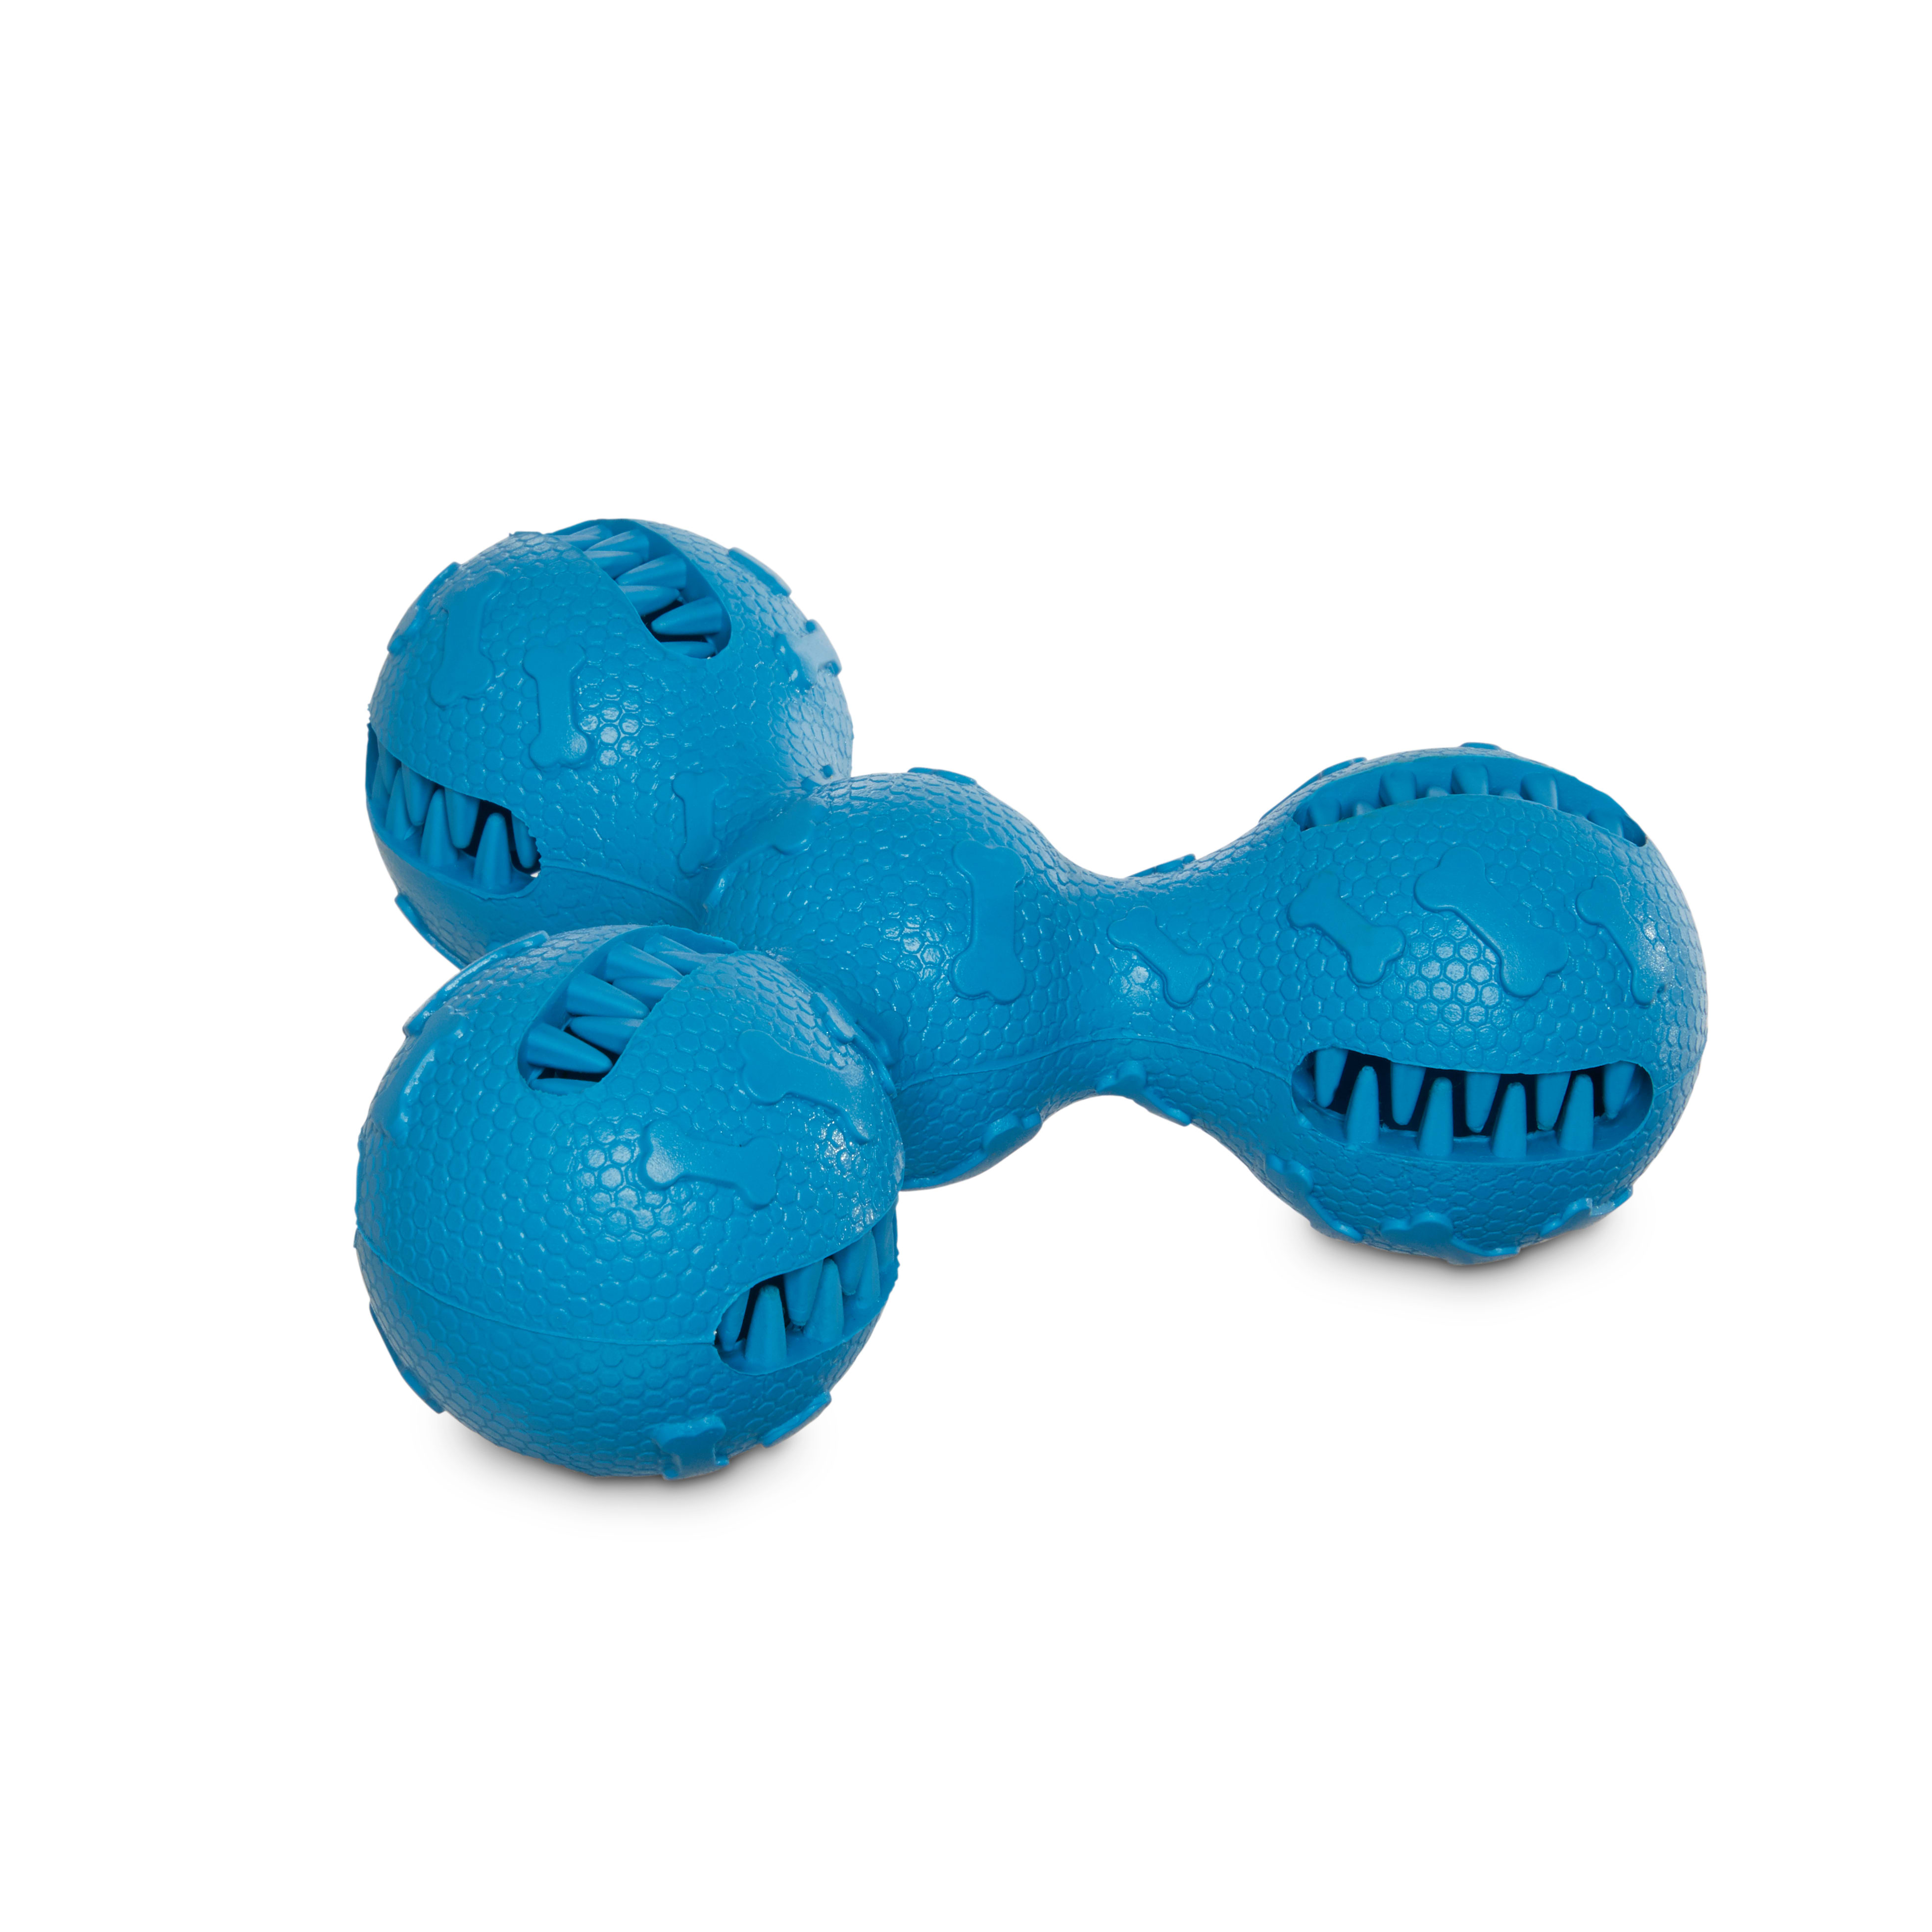 Leaps & Bounds Multi-use Treat Dispenser Dog Toy